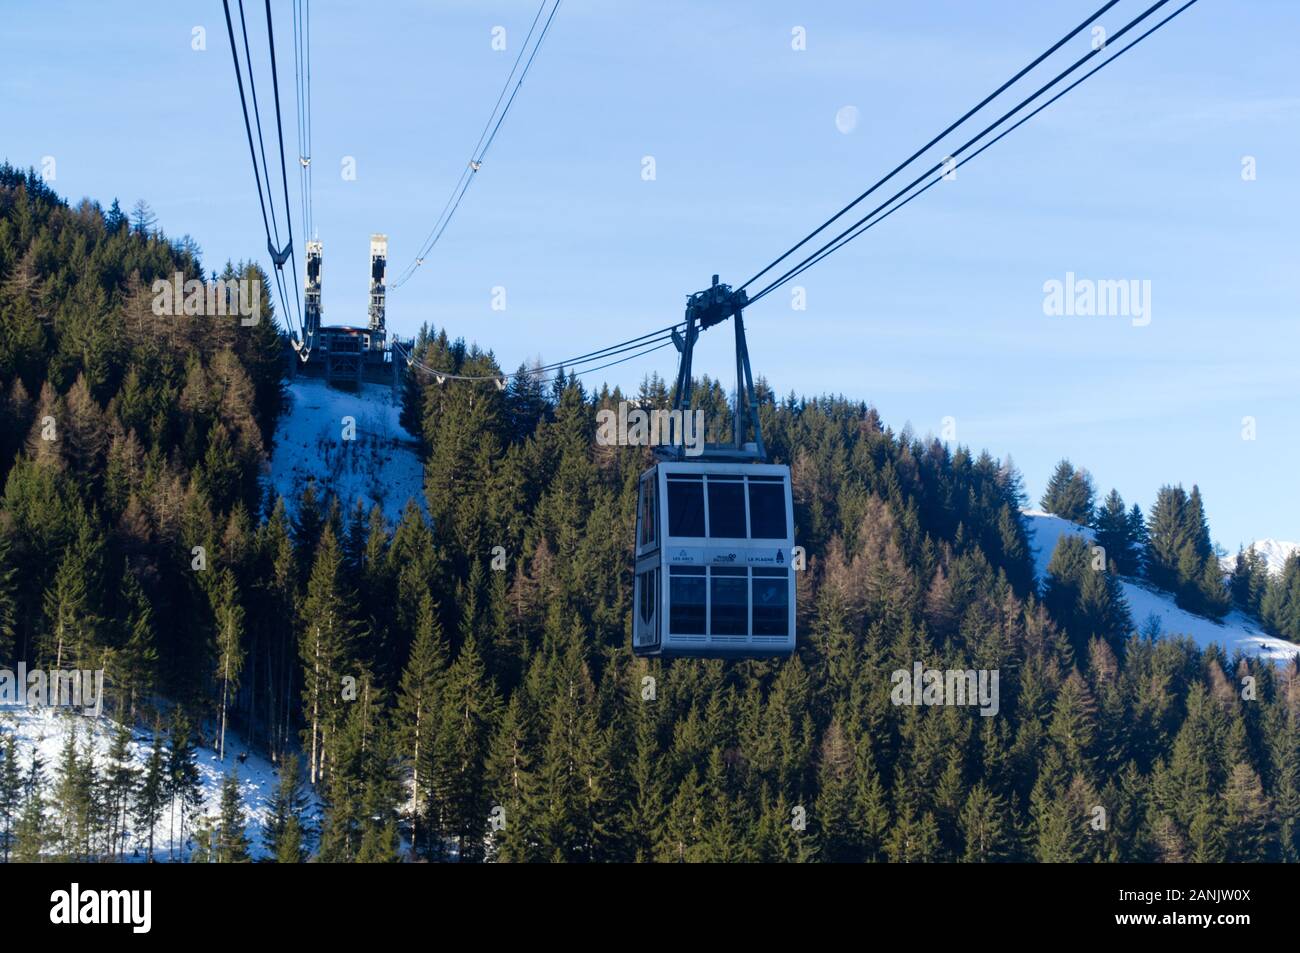 Vanoise Express - Double Decker Cable Car in La Plagne/ Montchavin Station  Editorial Stock Photo - Image of construction, mountains: 140143108